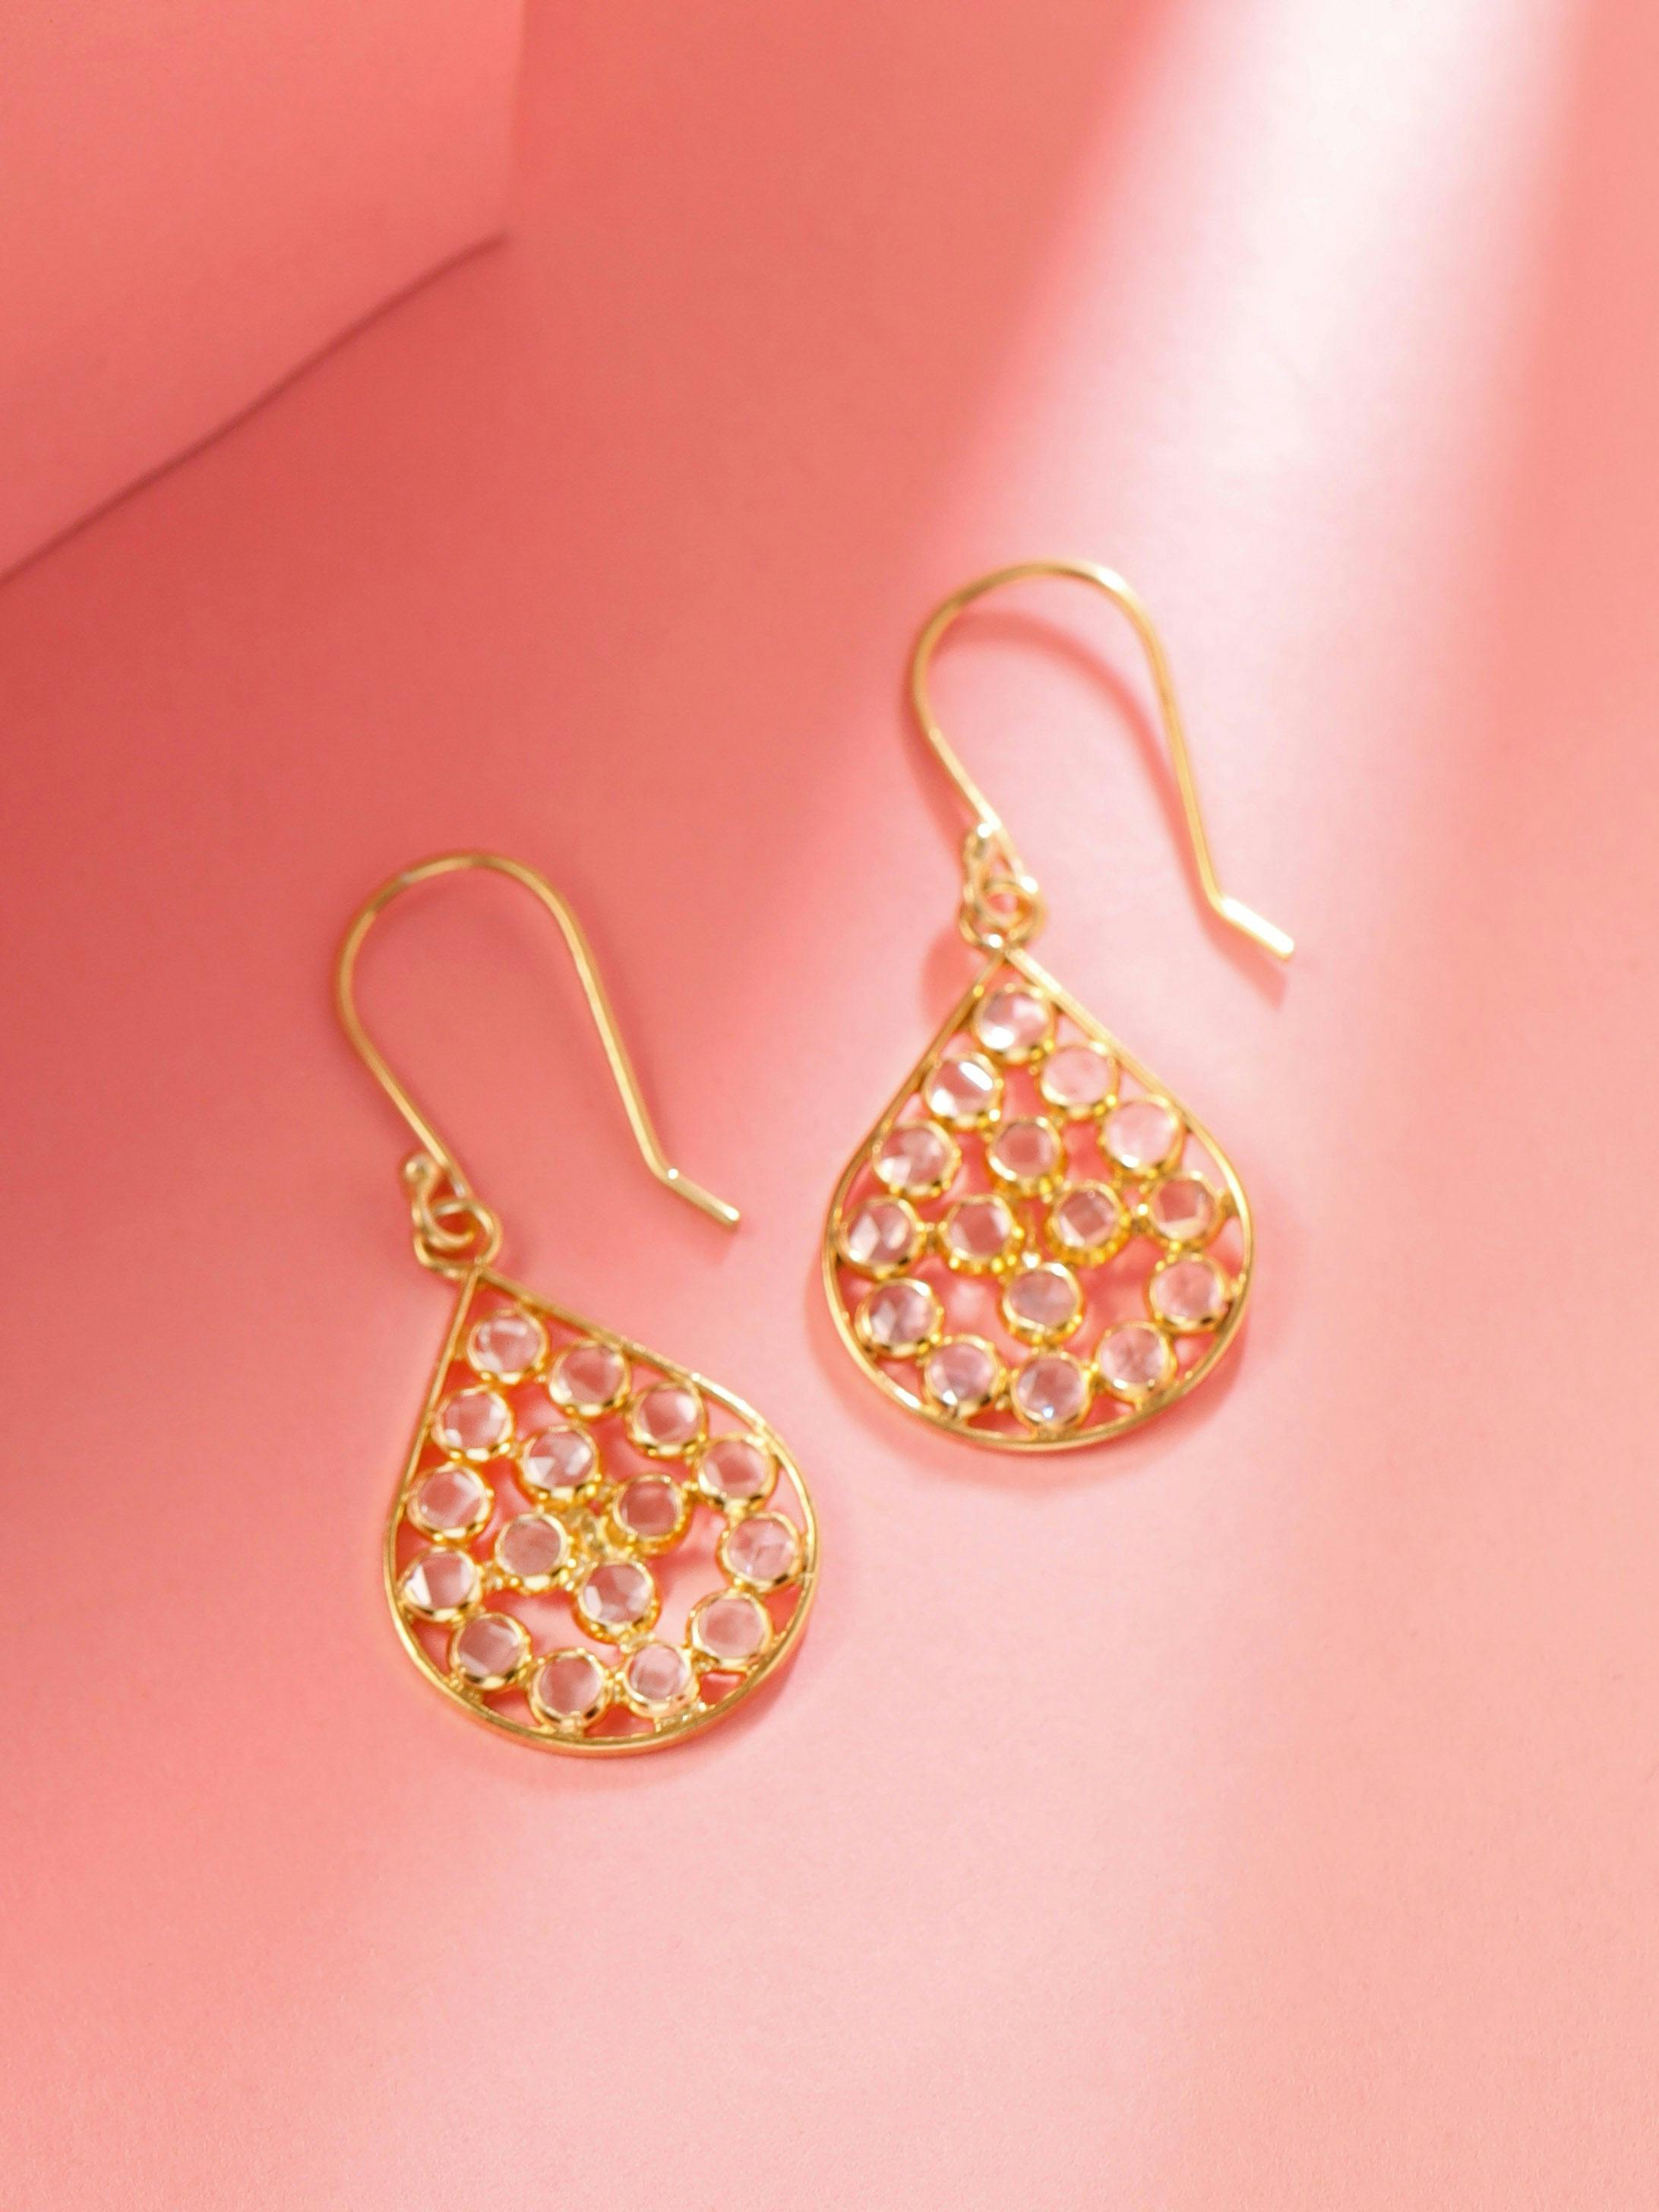 Pear shaped hook earrings, a product by The Jewel Closet Store